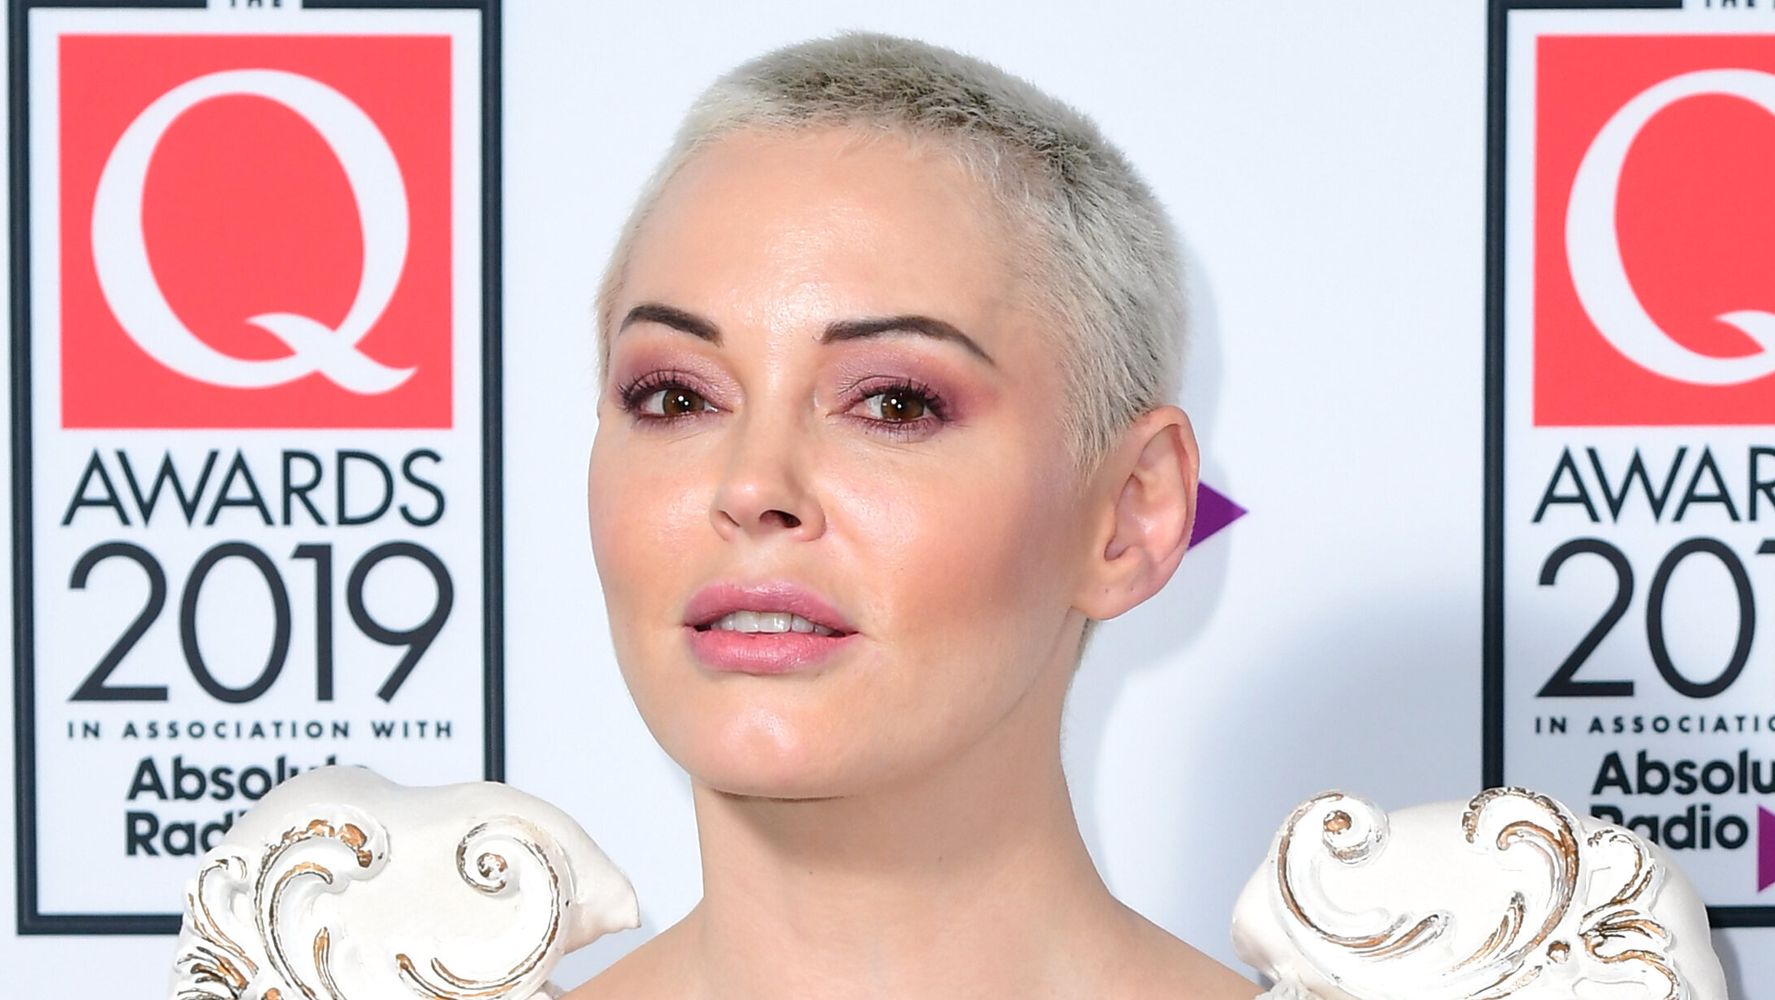 Rose McGowan Laces Into Oprah Winfrey Over Harvey Weinstein: 'Fake As They Come'